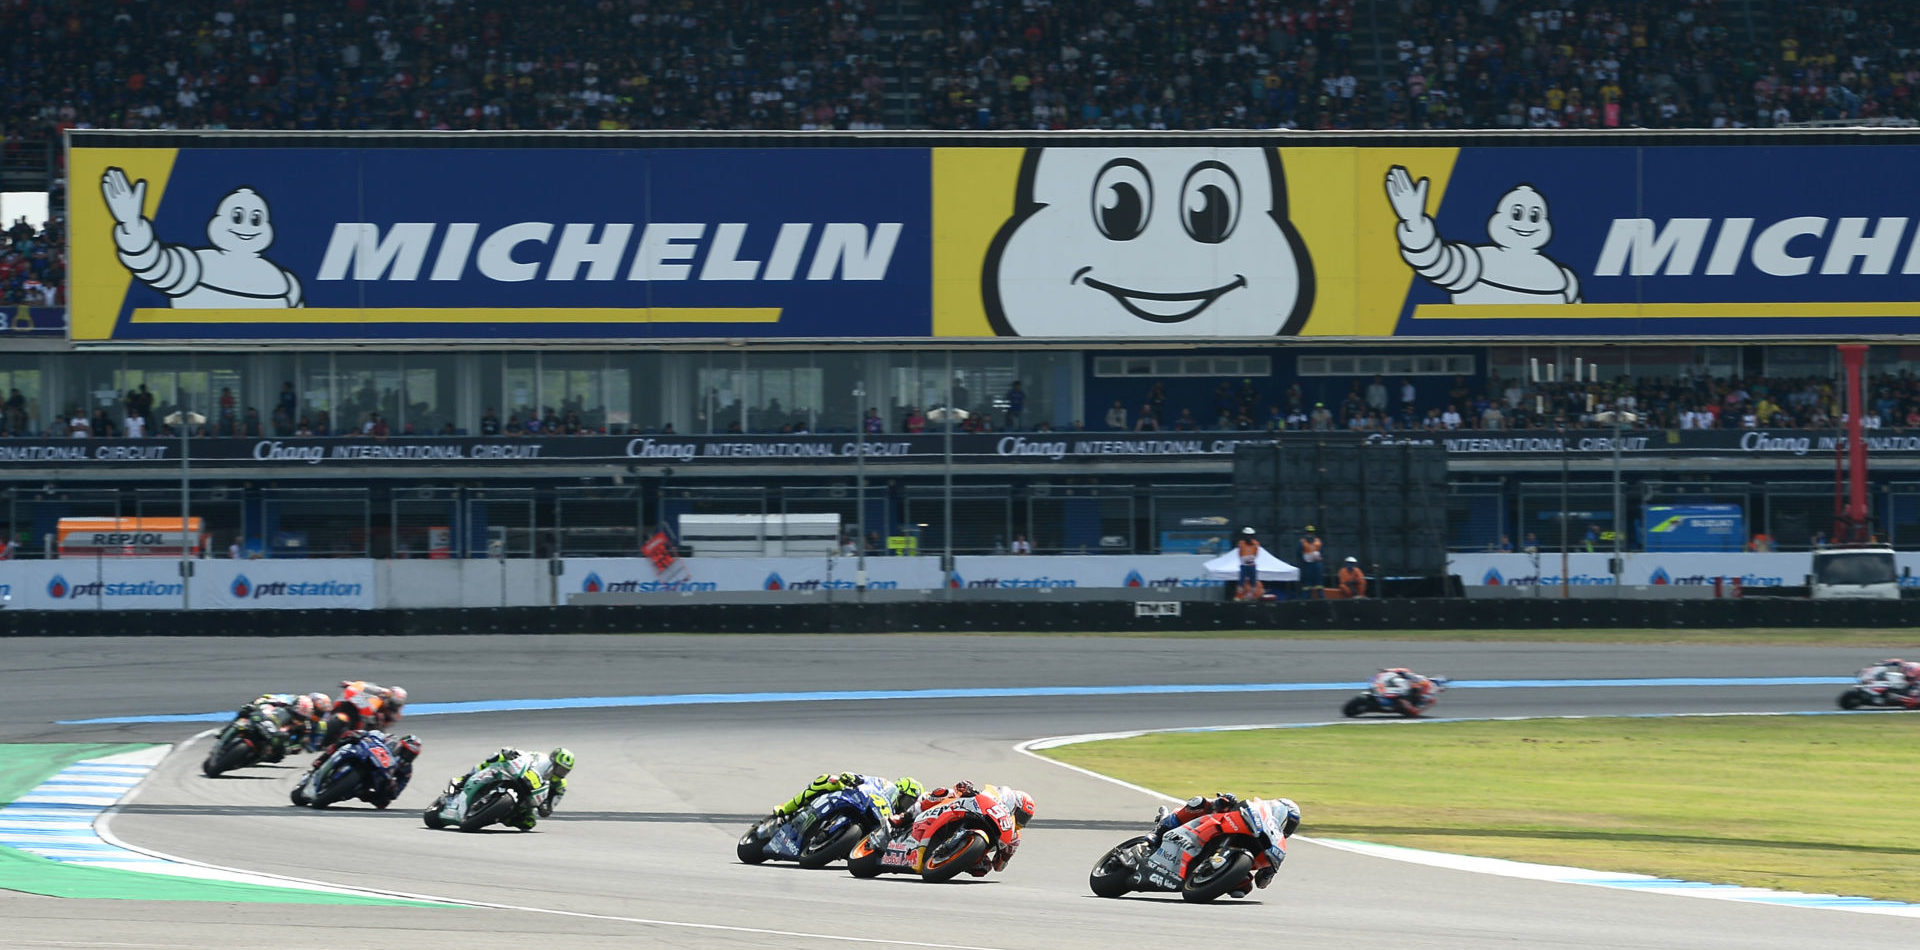 Action from the MotoGP race in Thailand in 2018. Photo courtesy of Michelin.